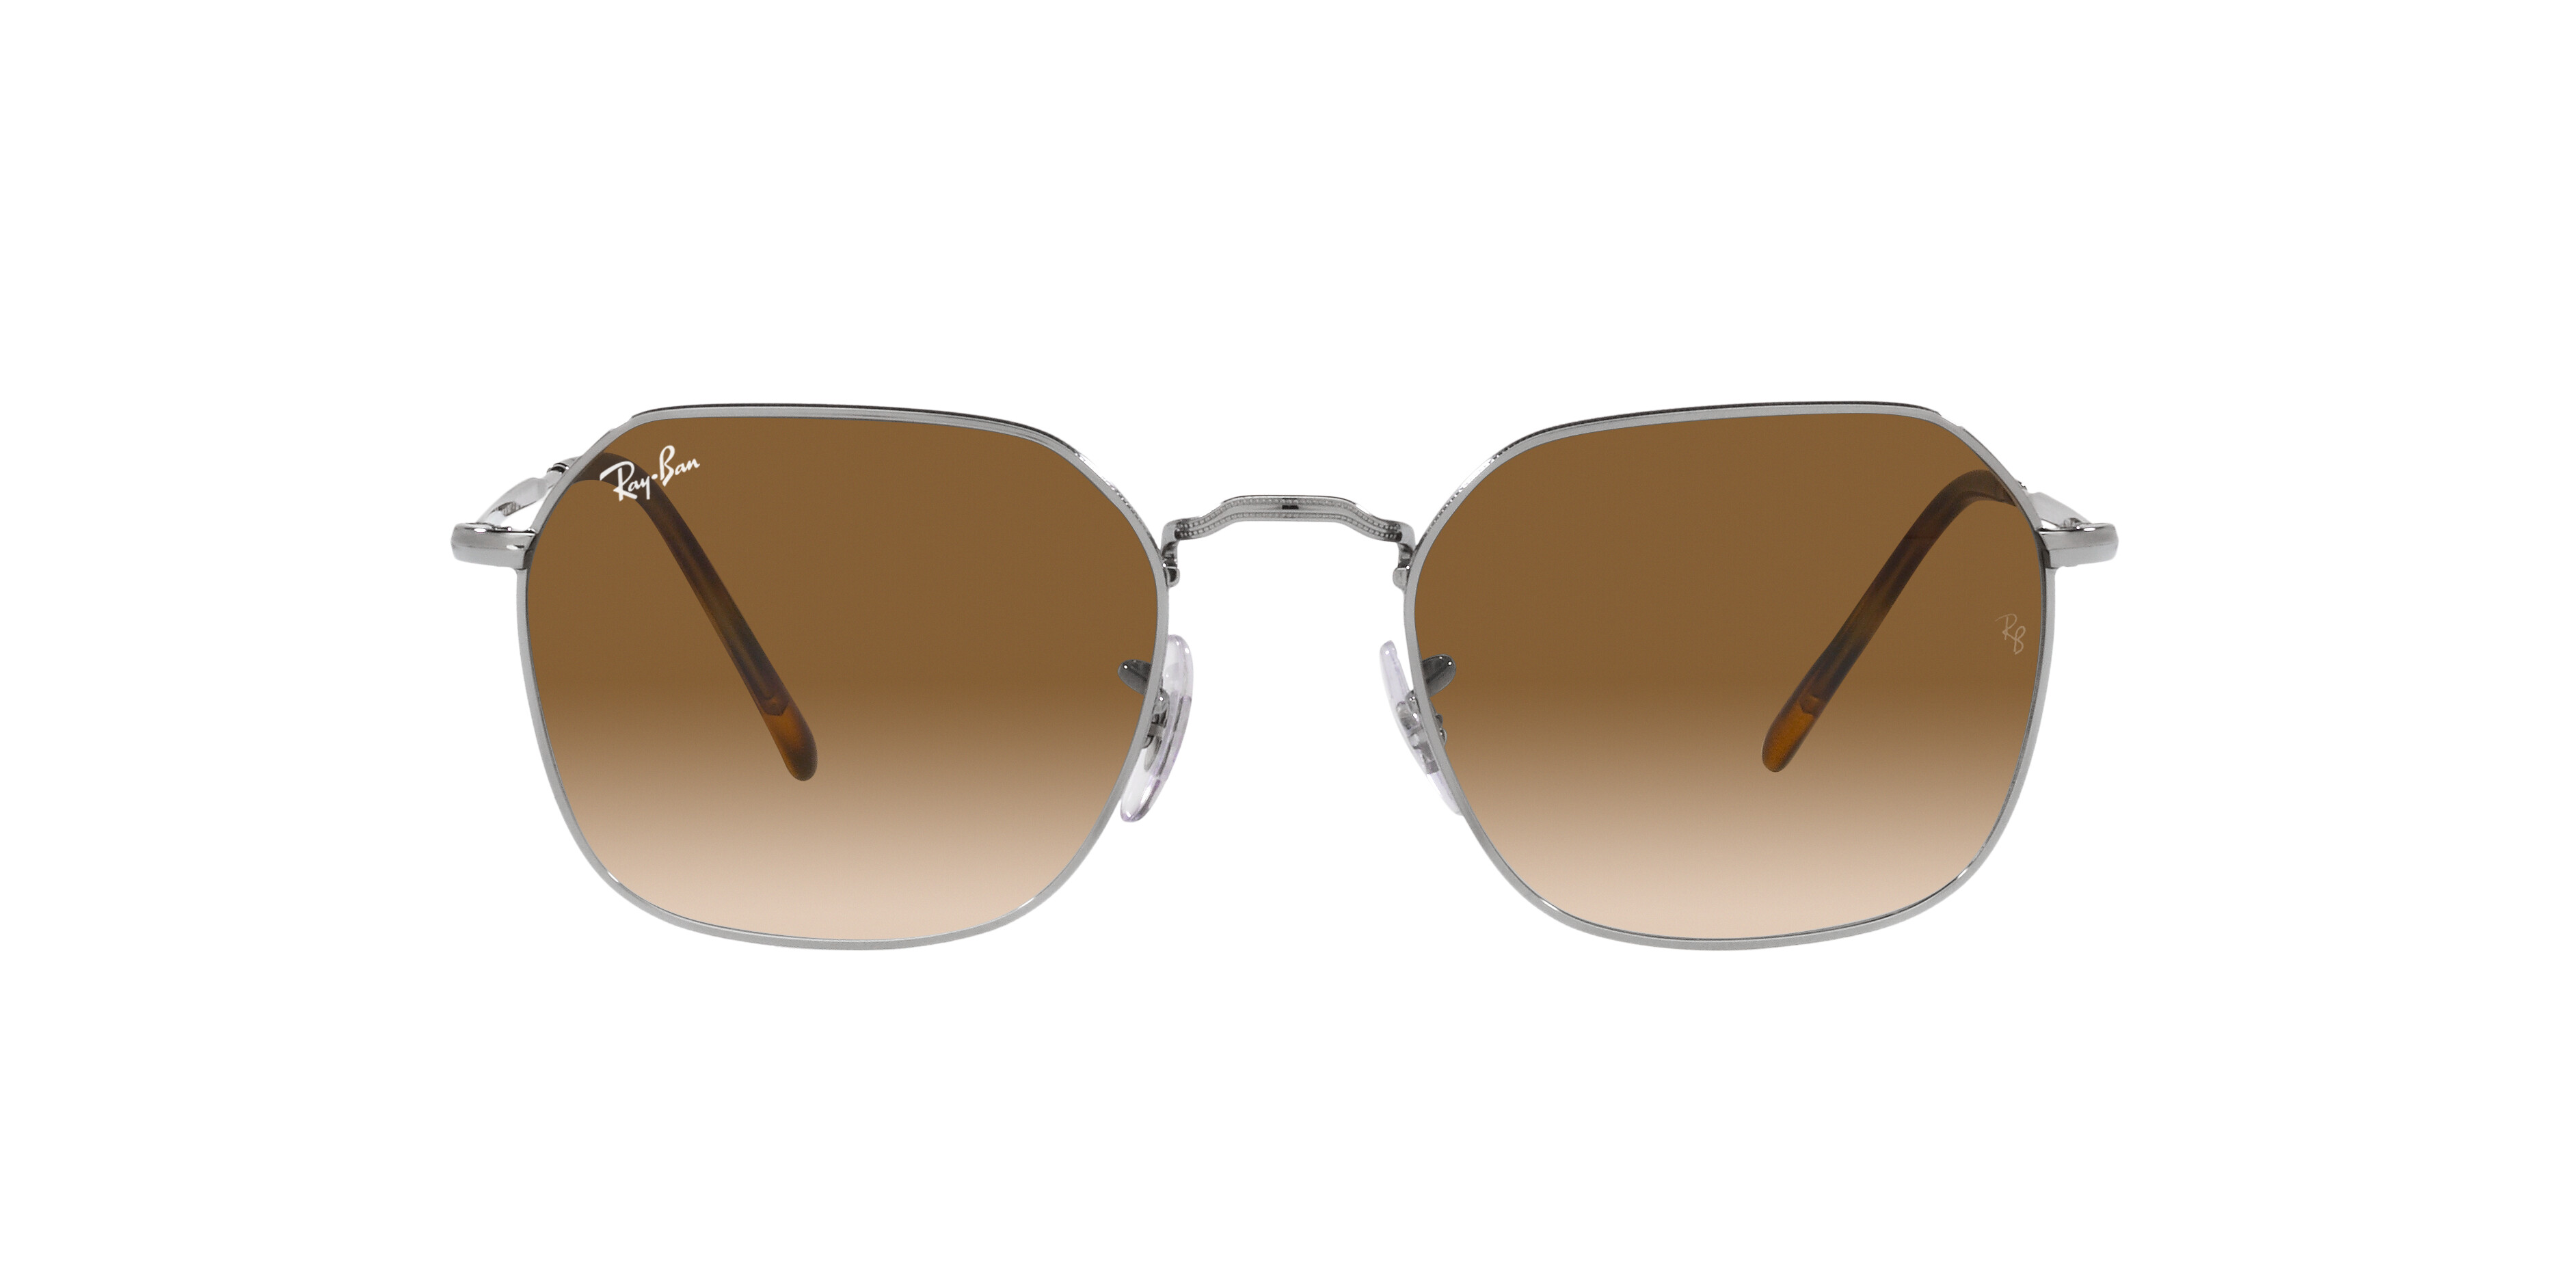 [products.image.front] Ray-Ban JIM 0RB3694 004/51 Sonnenbrille